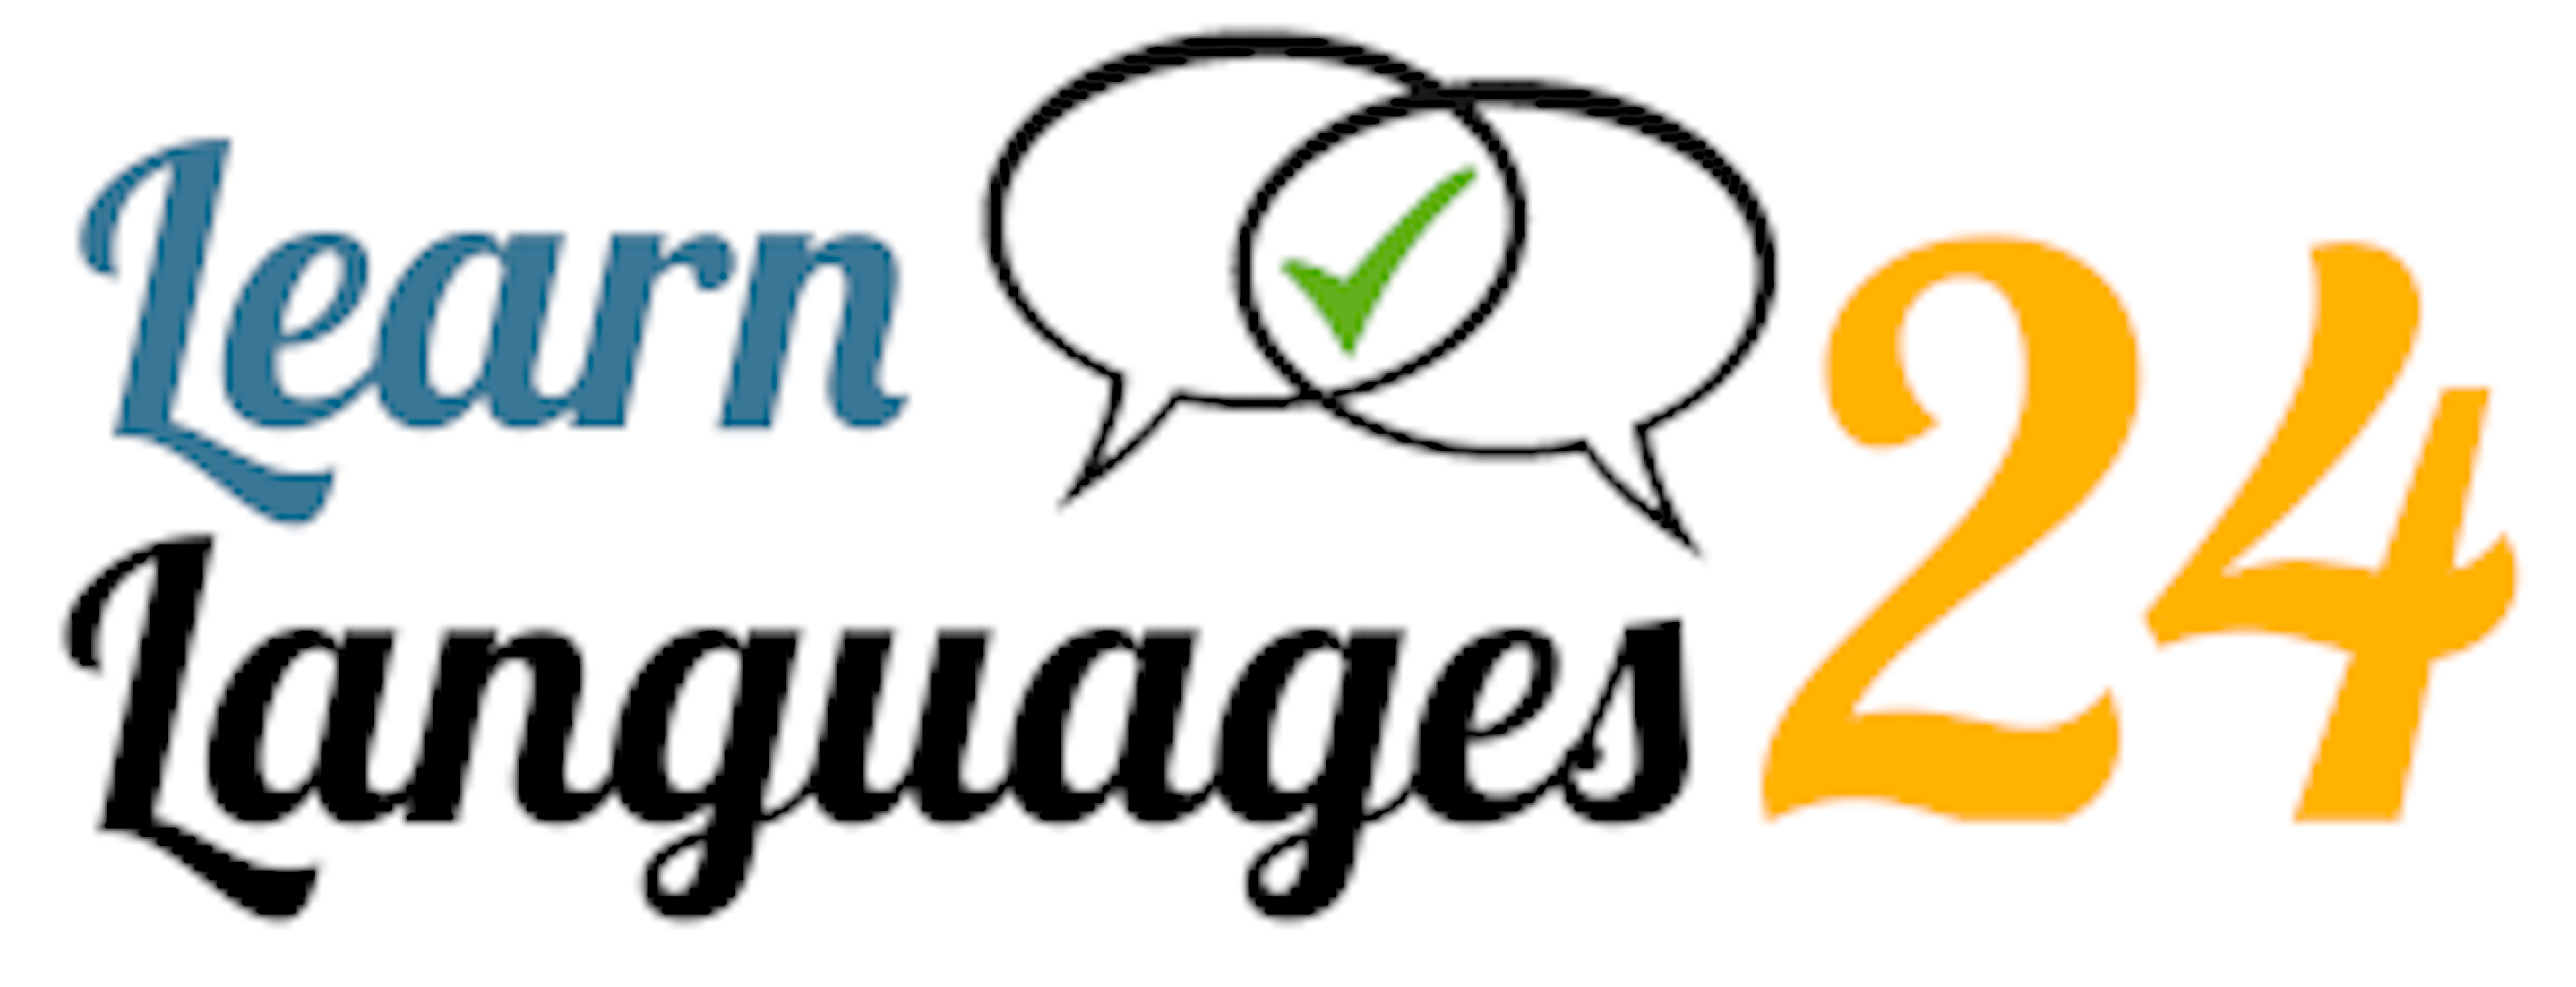 LearnLanguages24 Logo